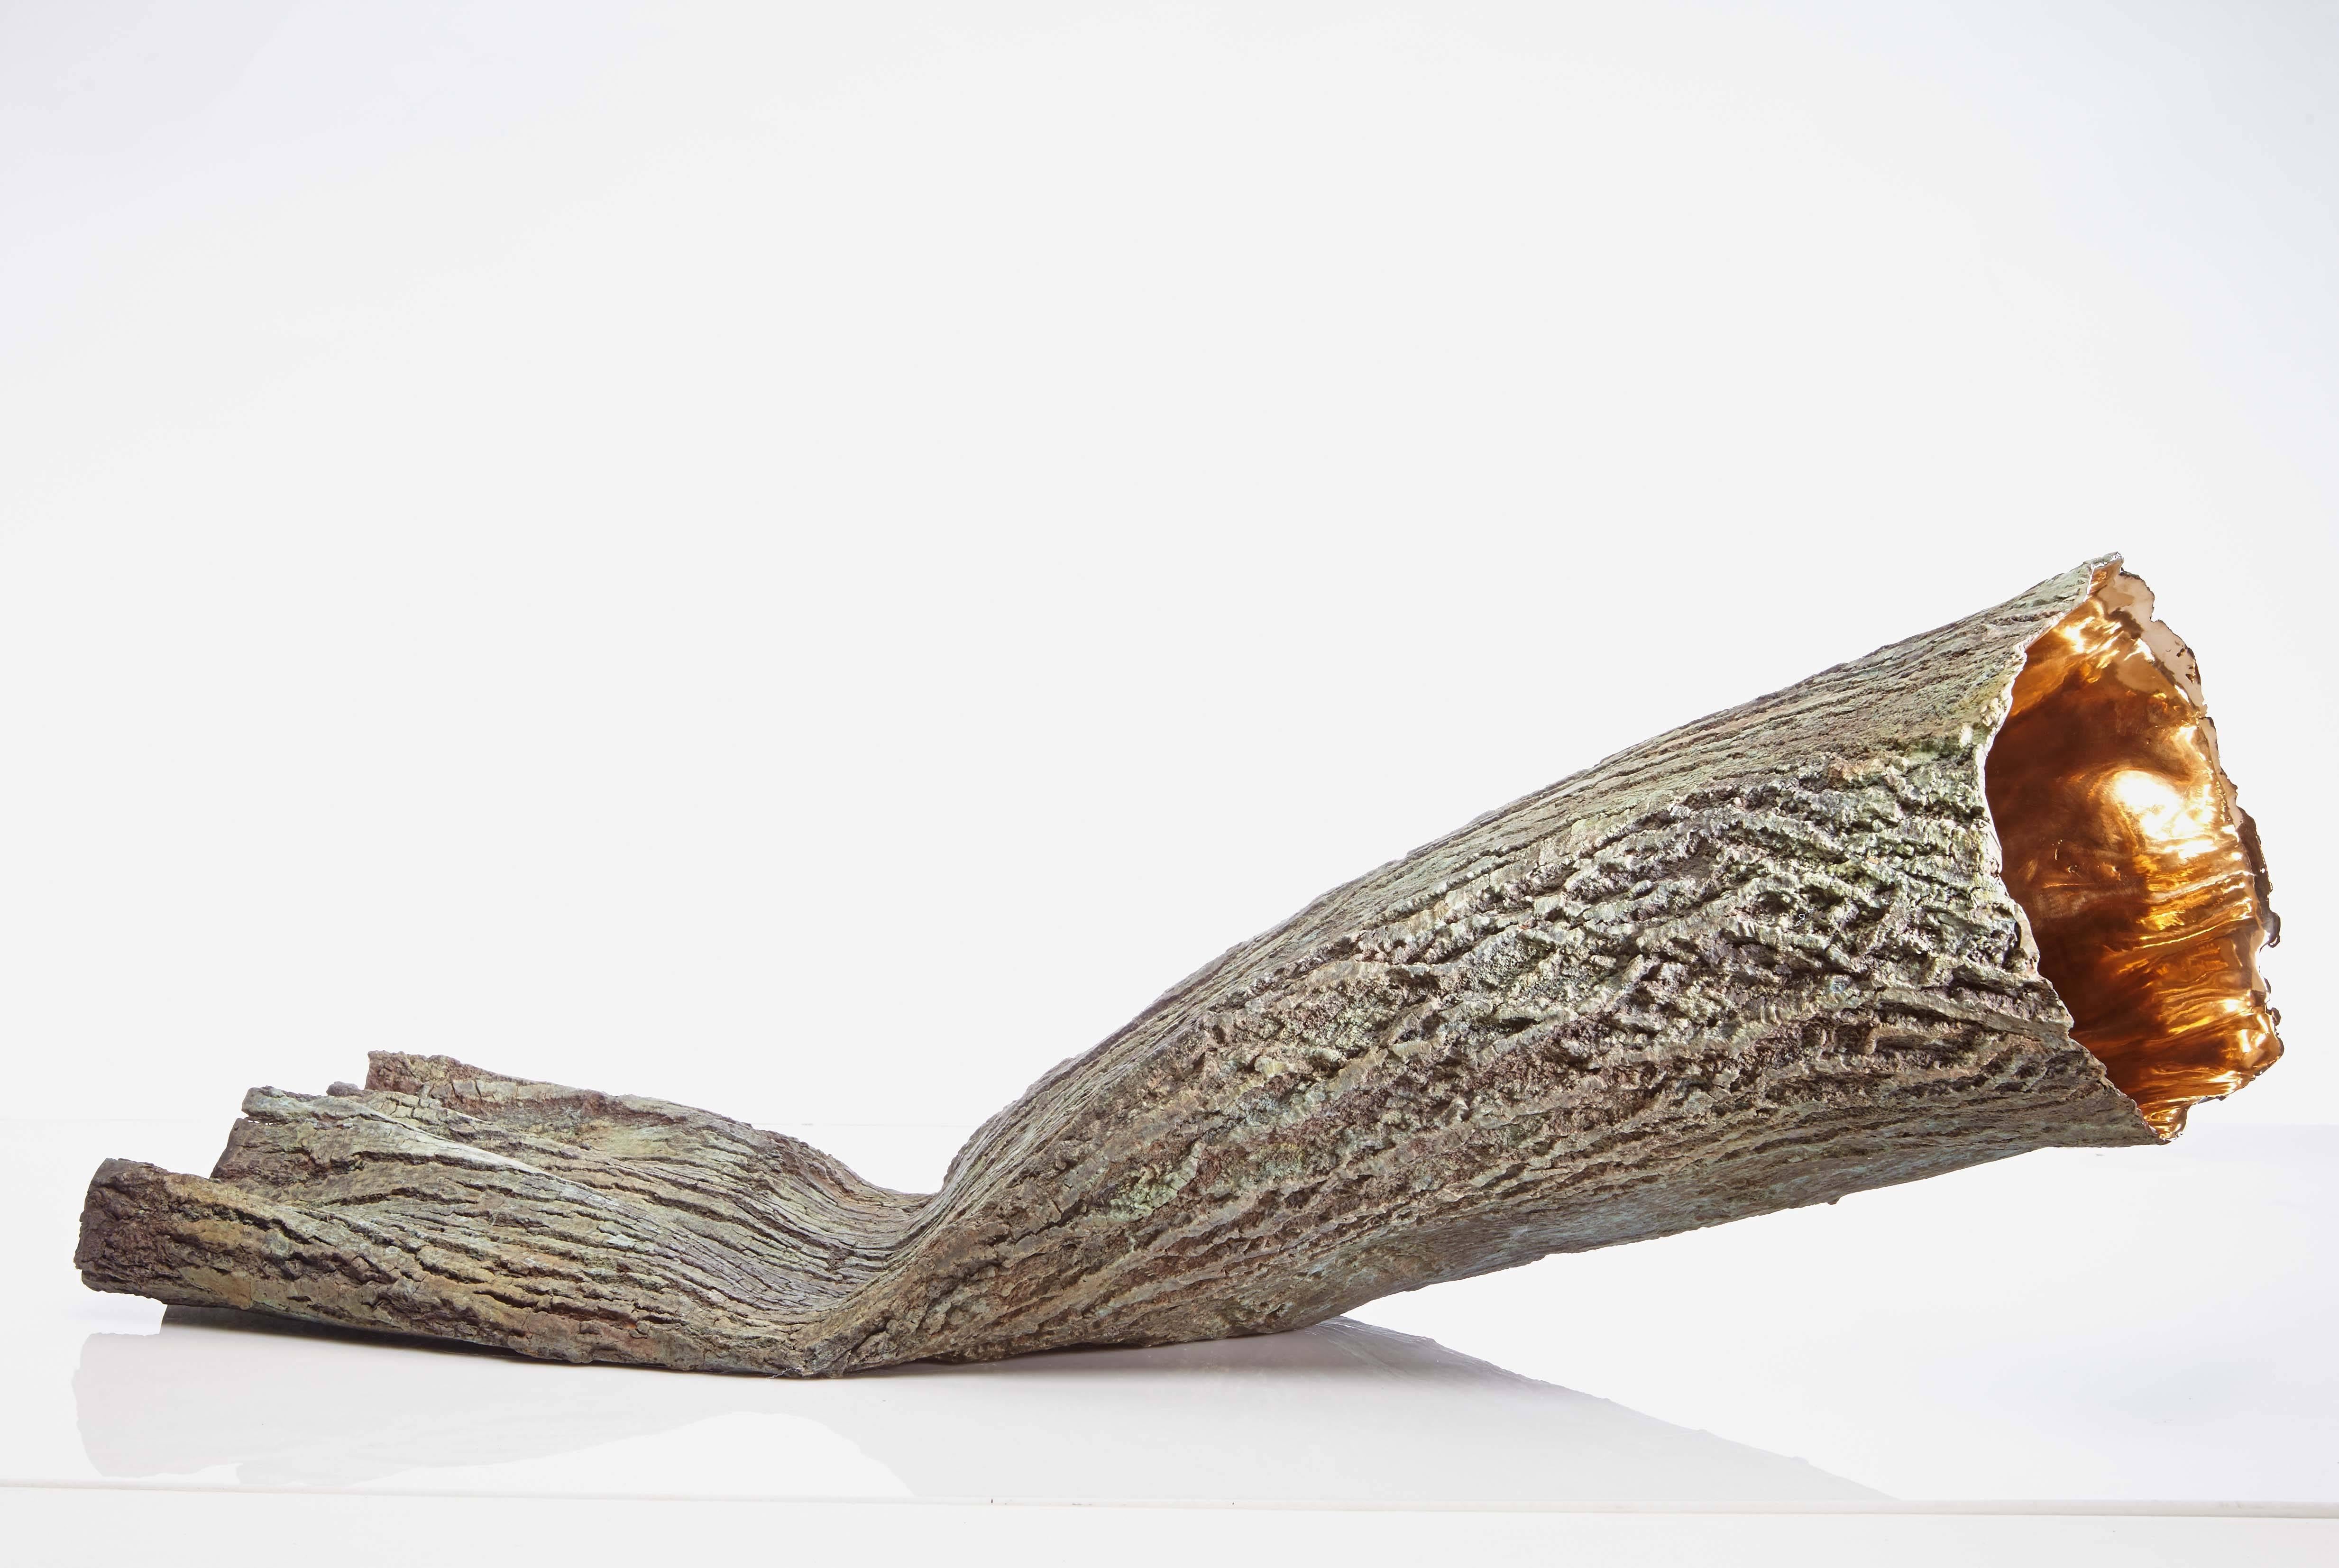 Container (2014) is a work by contemporary French artist Romain Langlois. 
Bronze, 39 cm × 106 cm × 26 cm. Edition of 8 & 4 A.P.
In this bronze sculpture, Romain Langlois has produced a really realistic imitation of tree bark. The textures are